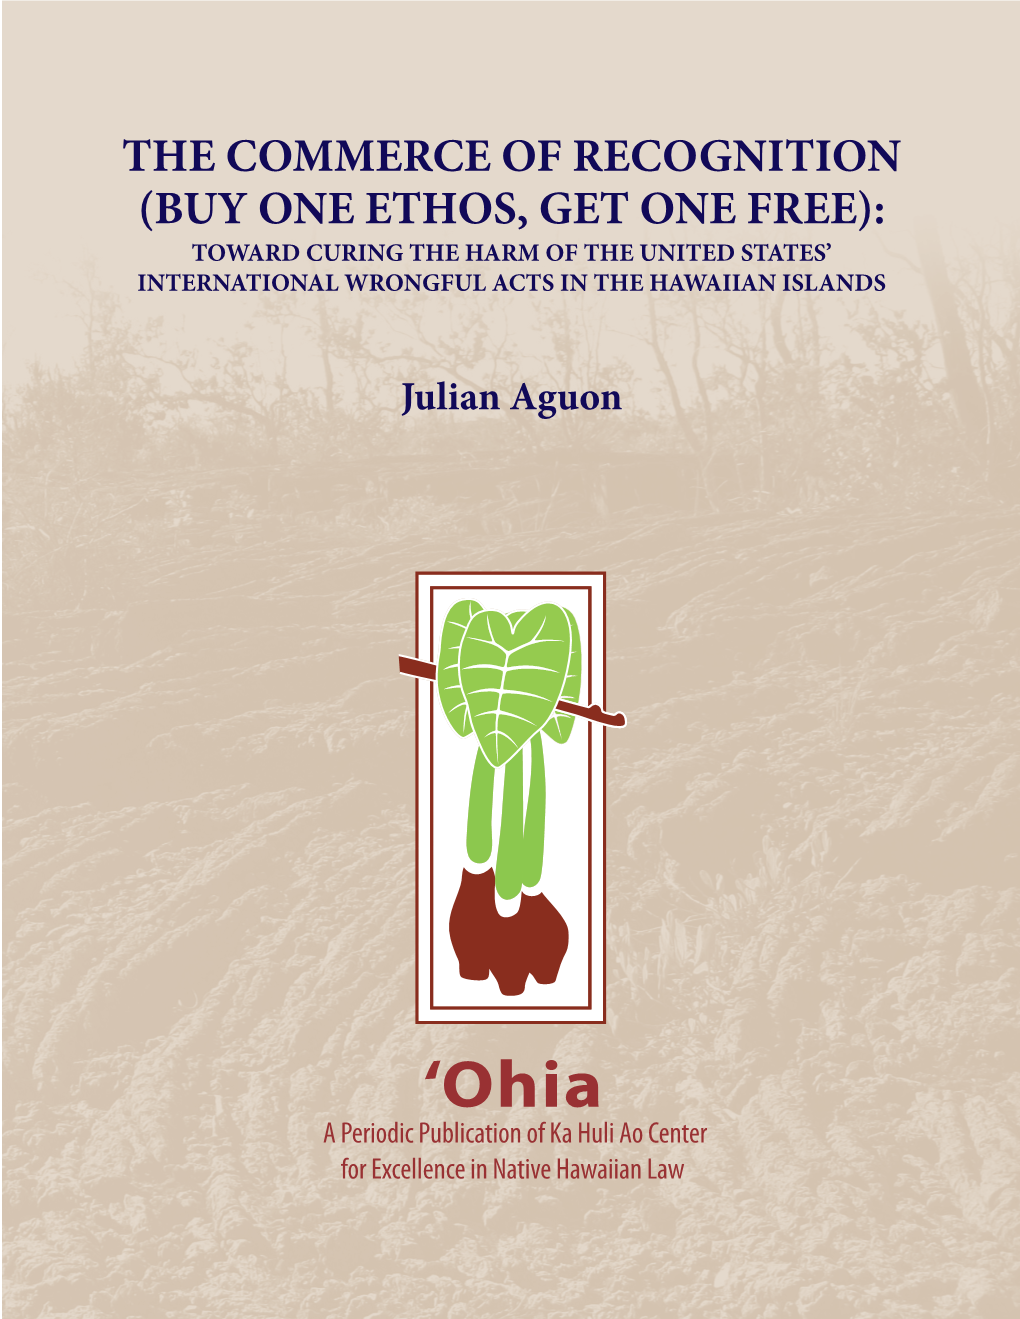 The Commerce of Recognition (Buy One Ethos, Get One Free): Toward Curing the Harm of the United States’ International Wrongful Acts in the Hawaiian Islands